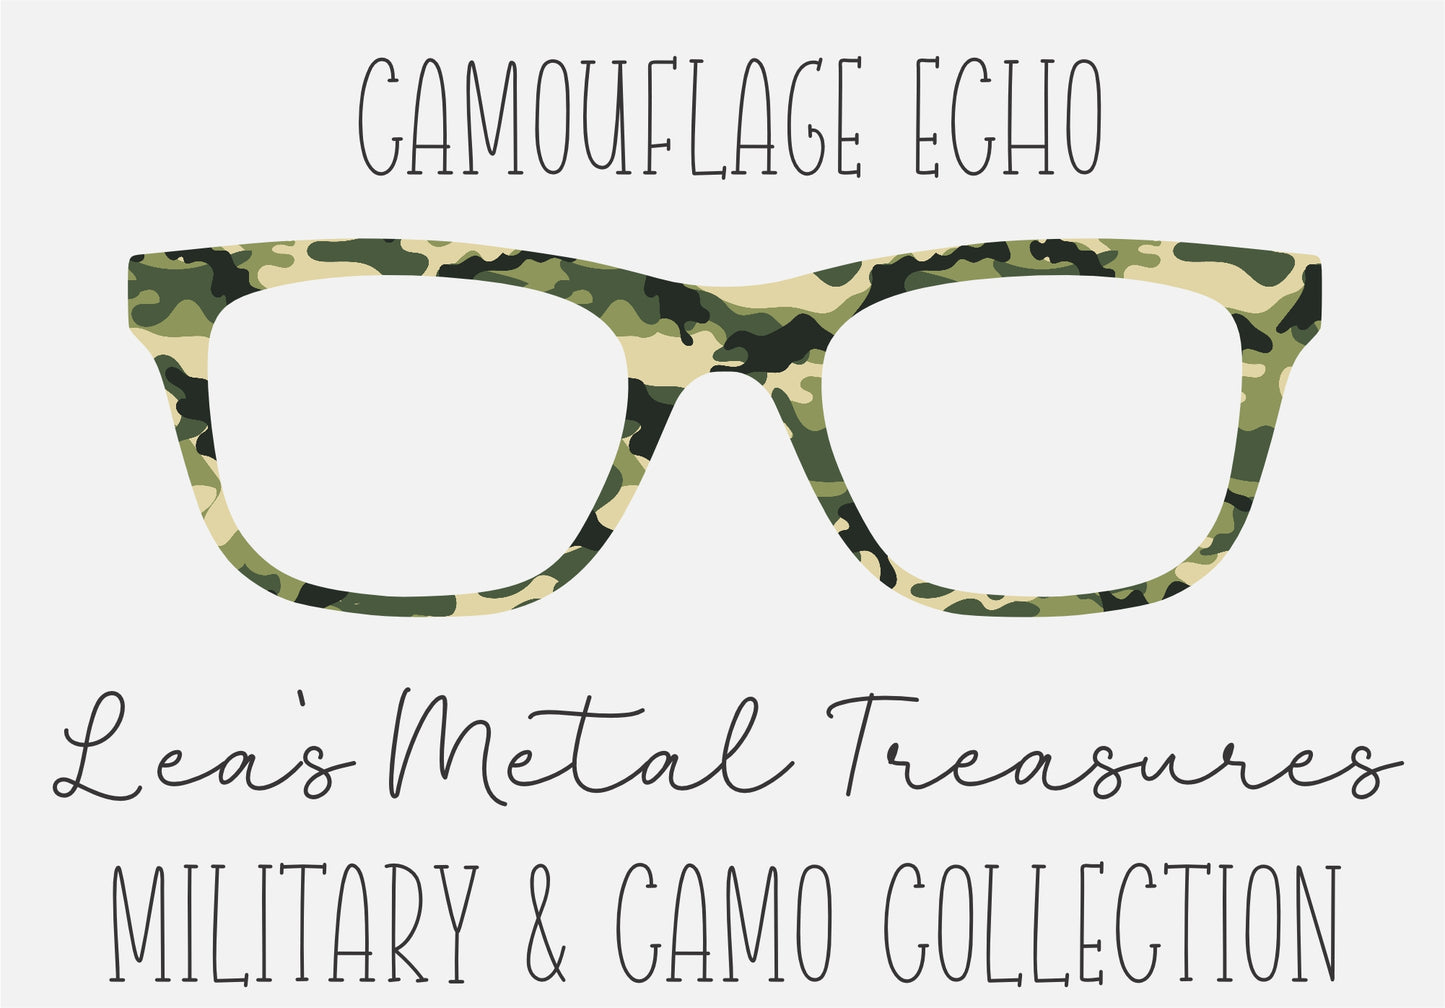 CAMOUFLAGE ECHO Eyewear Frame Toppers COMES WITH MAGNETS